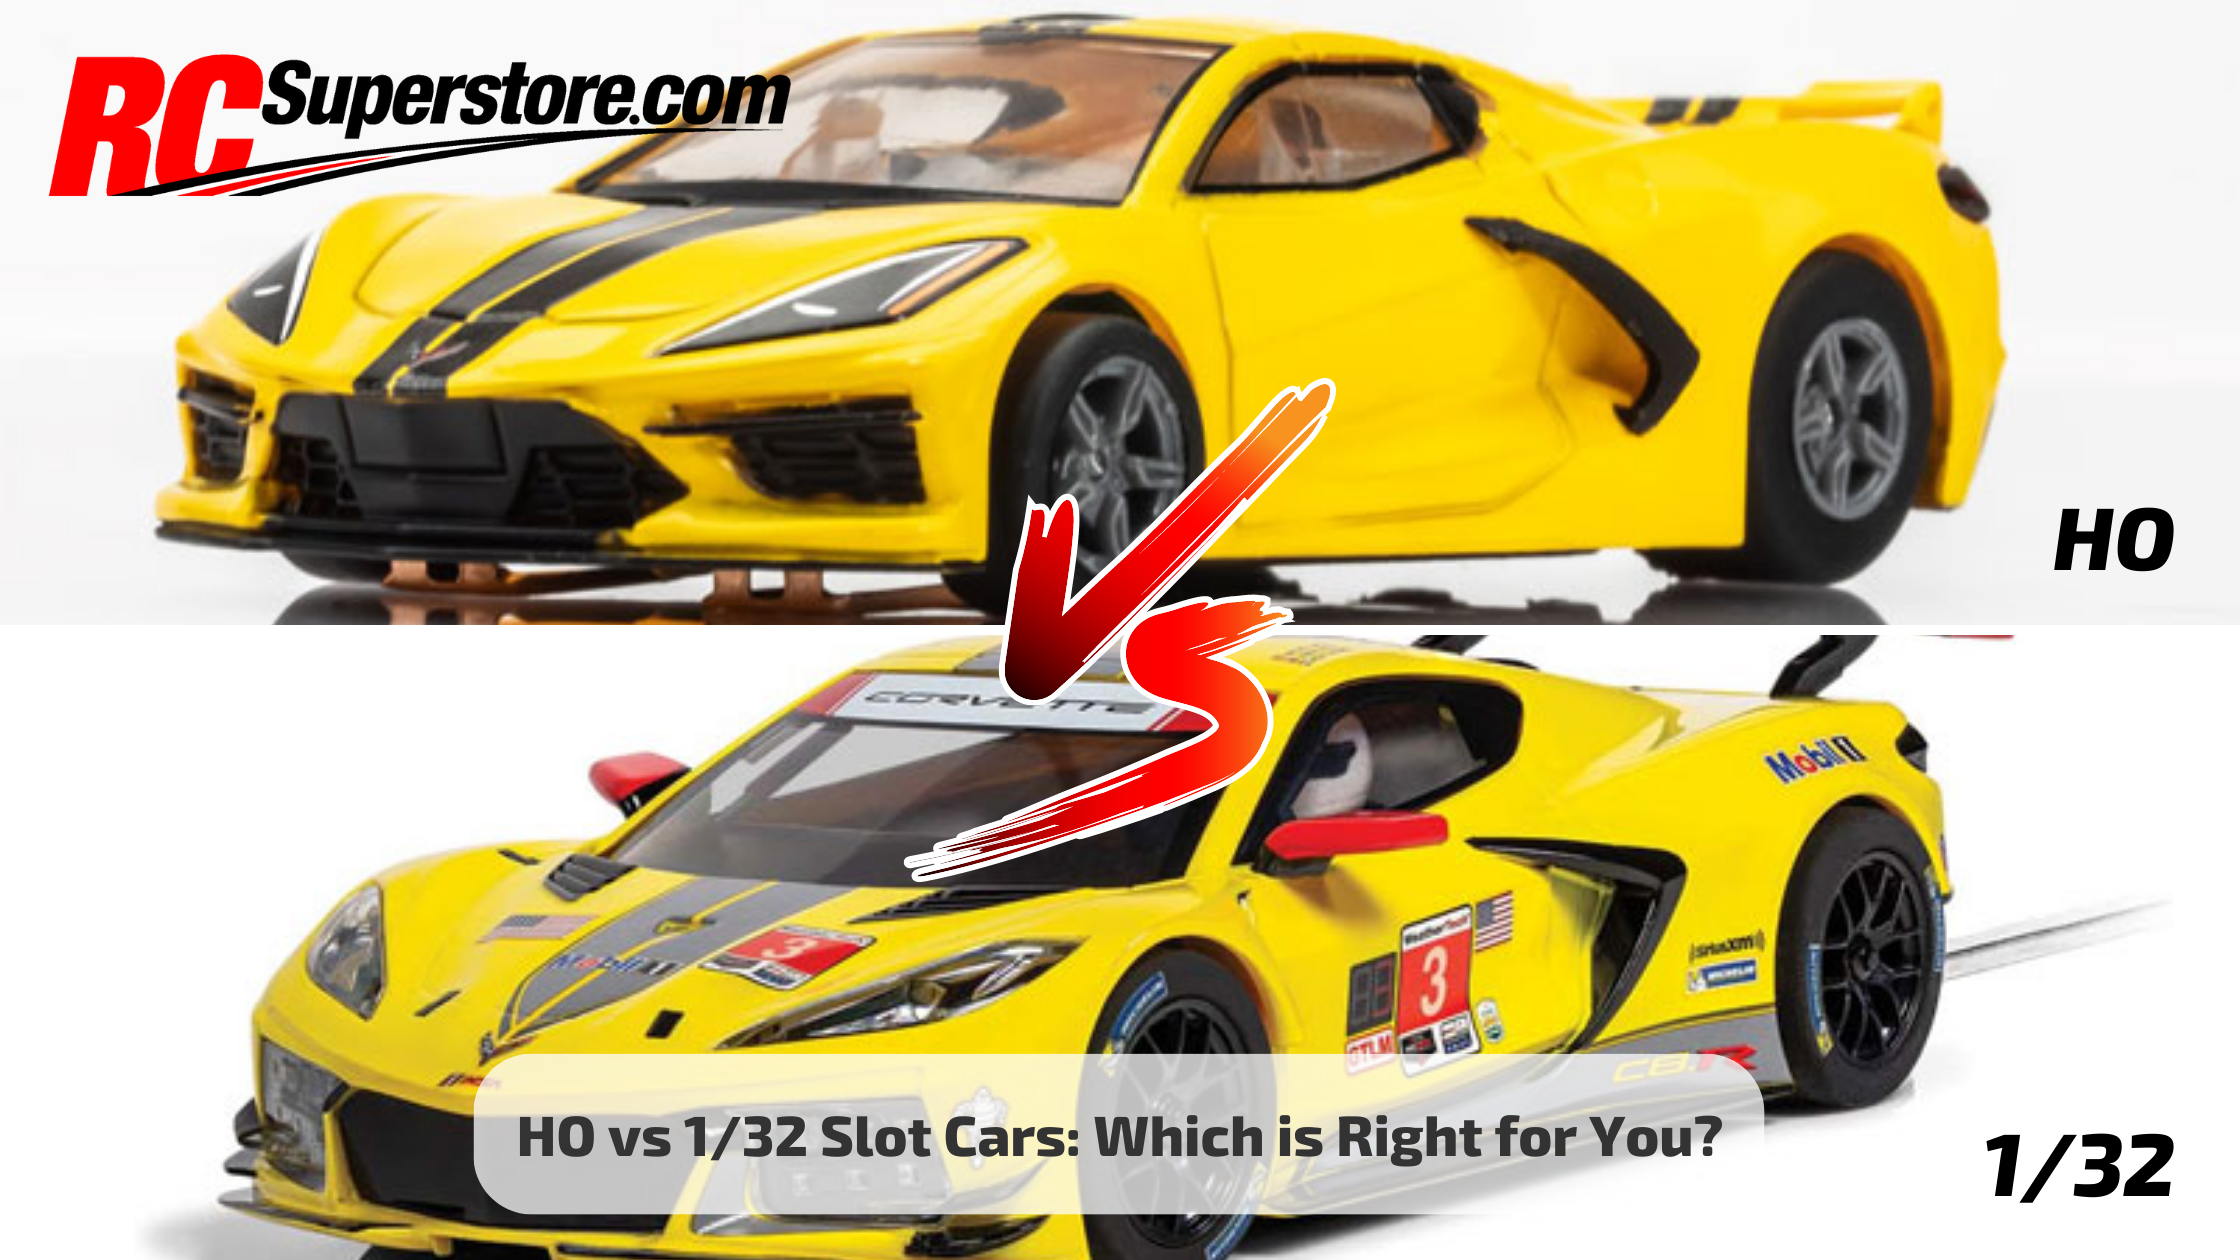 HO vs 1/32 Slot Cars: Which is Right For You? - RC Superstore